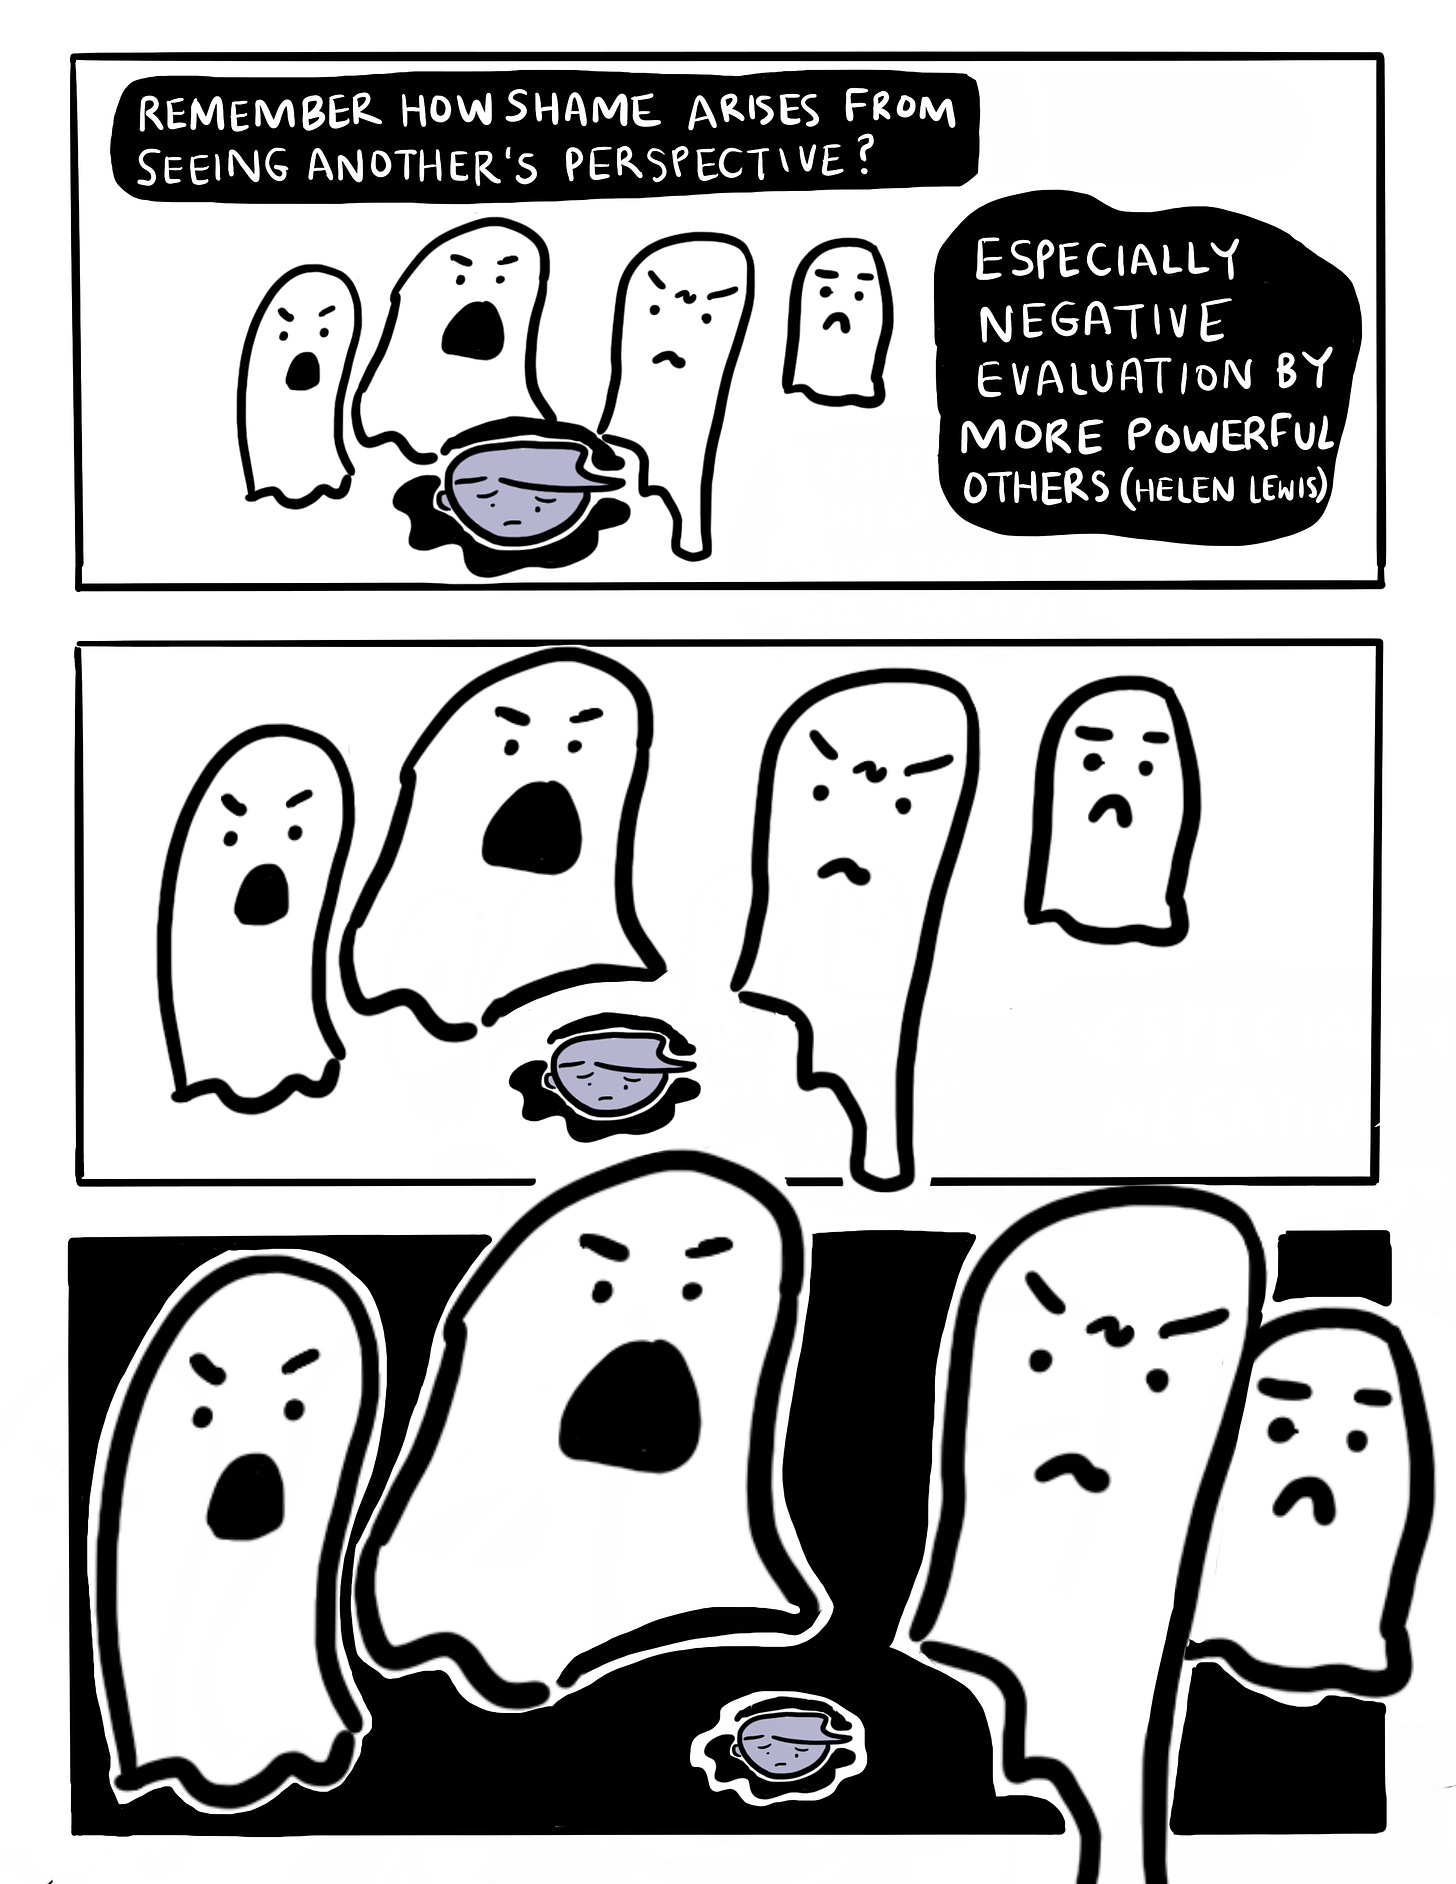 Text: Remember how shame arises from seeing another's perspective? Especially from evaluation by more powerful others (Helen Lewis). Four angry disappointed ghosts looming over a purple cartoon human head who looks ashamed in a black puddle. Three panels of the same image, with the ghosts getting increasingly bigger and the cartoon head shrinking even smaller.